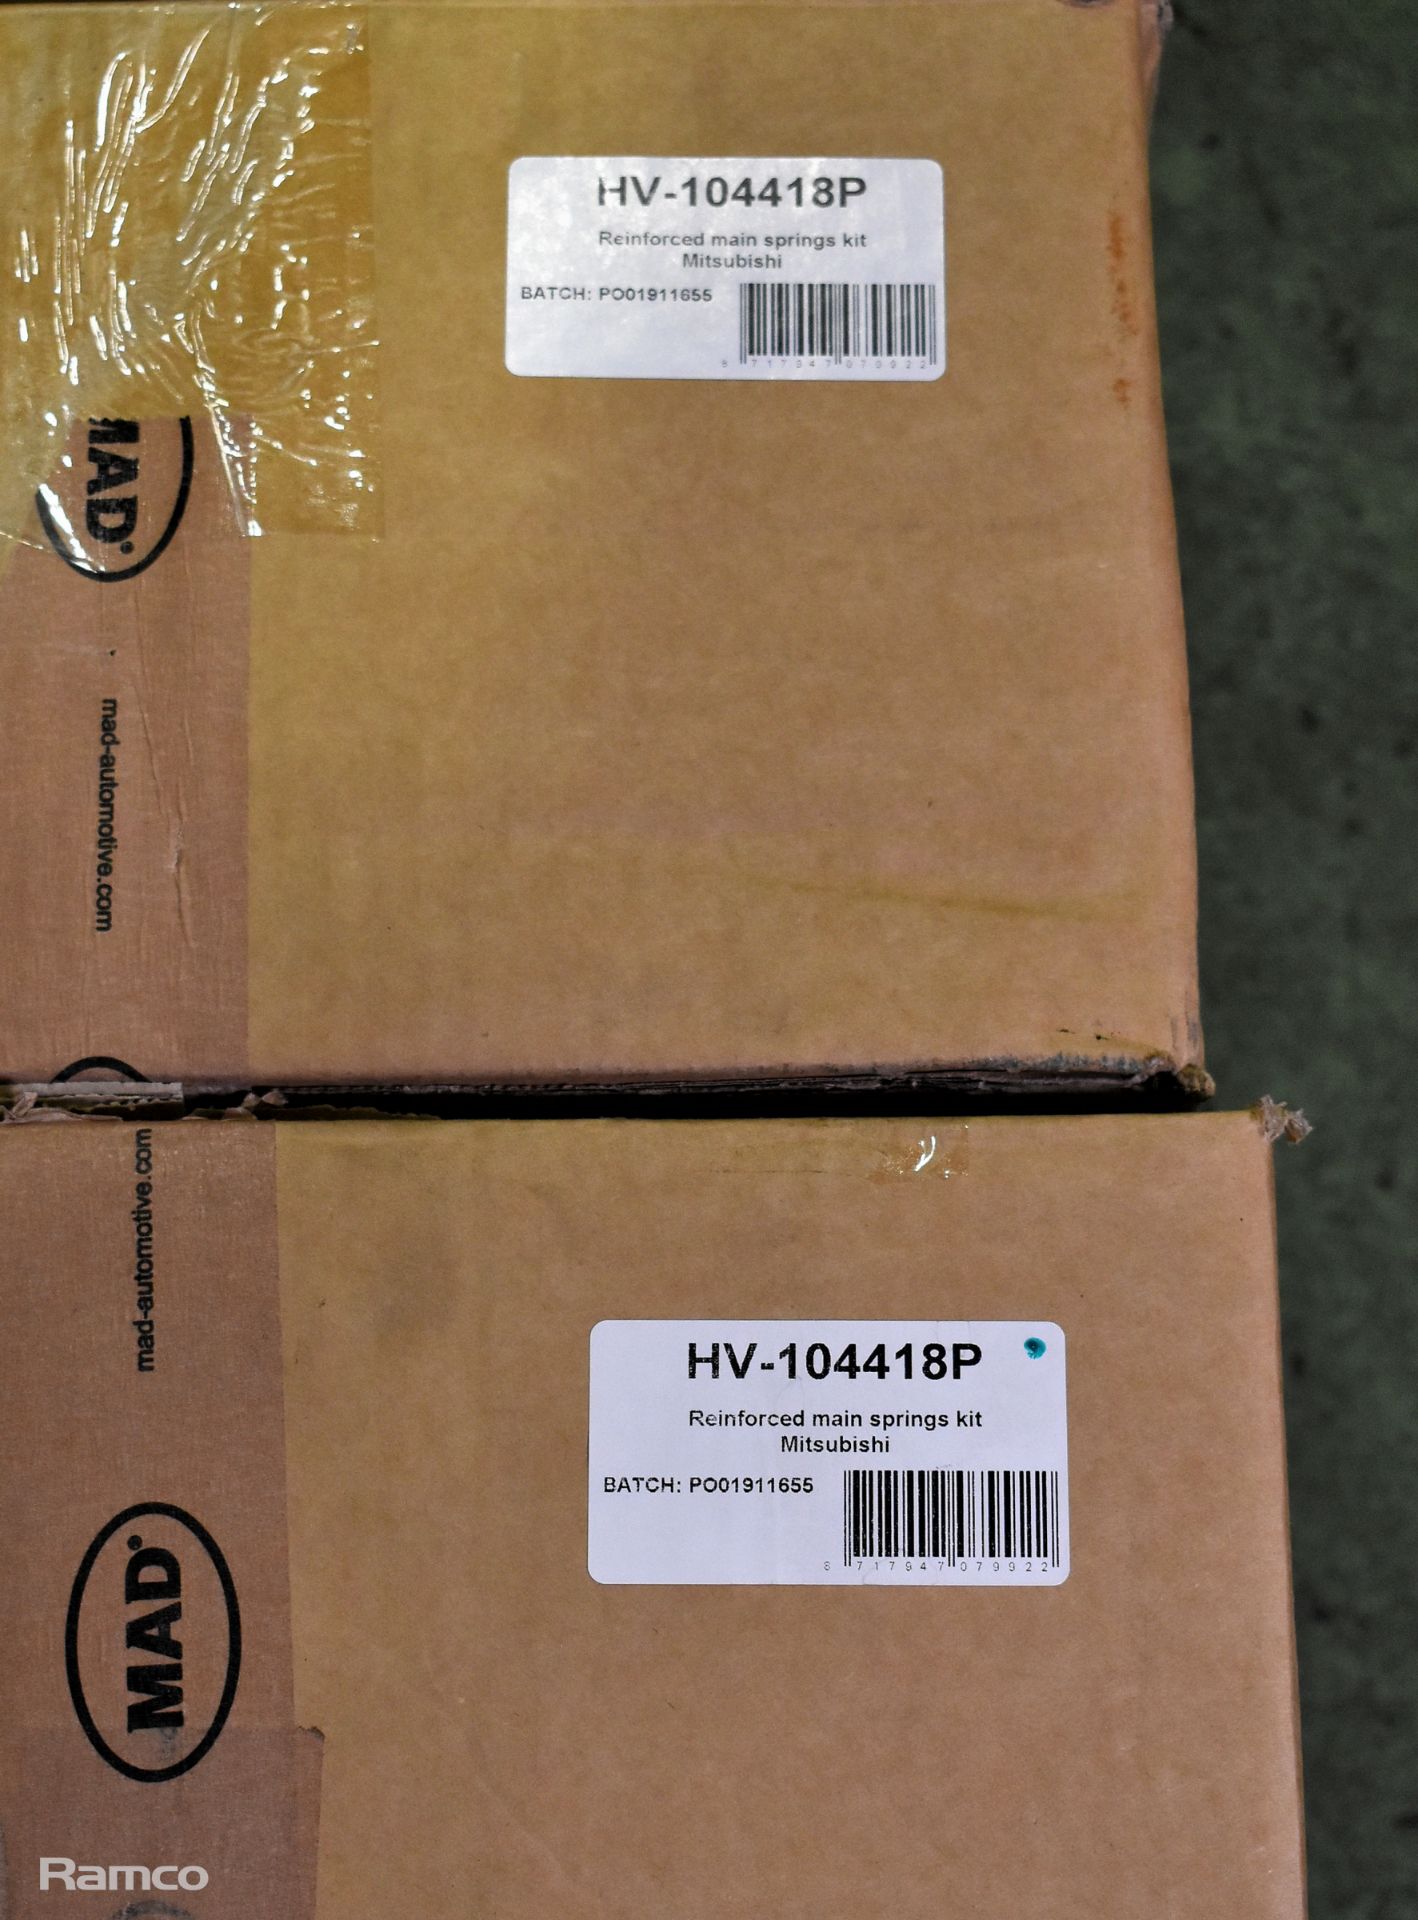 2x boxes of MAD Suspension Systems HV-104418P Mitsubishi Shogun Sport reinforced rear springs - Image 2 of 2